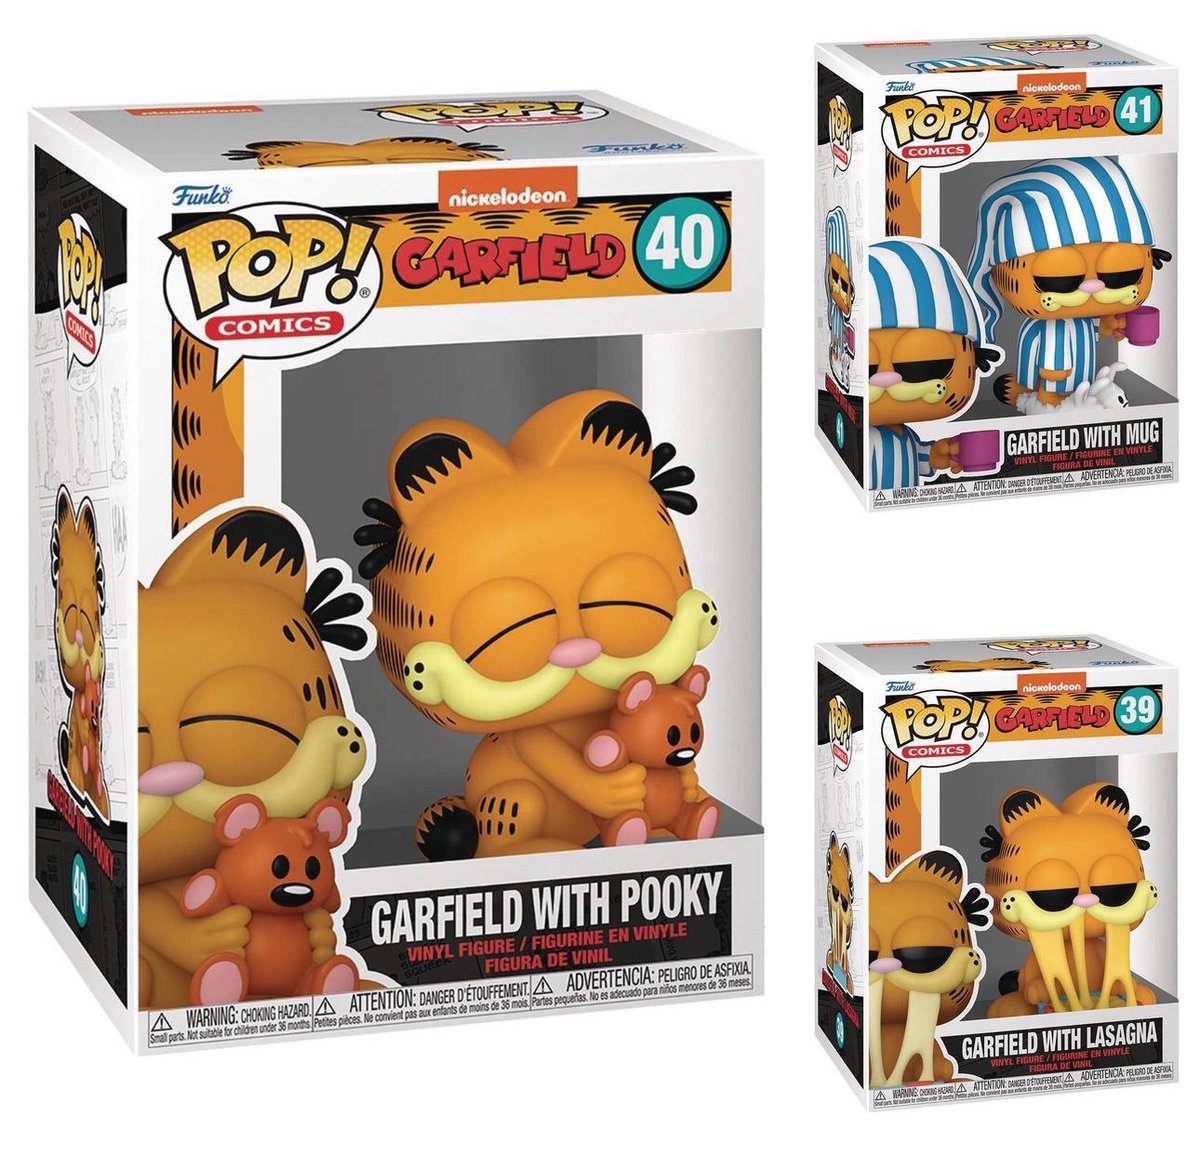 Its Lasagne time! First look at new Garfield pops via @RockOsiris #garfield #lasagne #Funkos #Funkopop #Collectibles #Collectible #Popholmes #Funkonews #Funkopopnews #Funkopopvinyl #Funkopops #Popvinyl #Funkofamily #Funkomania #Funkocollector #Toys